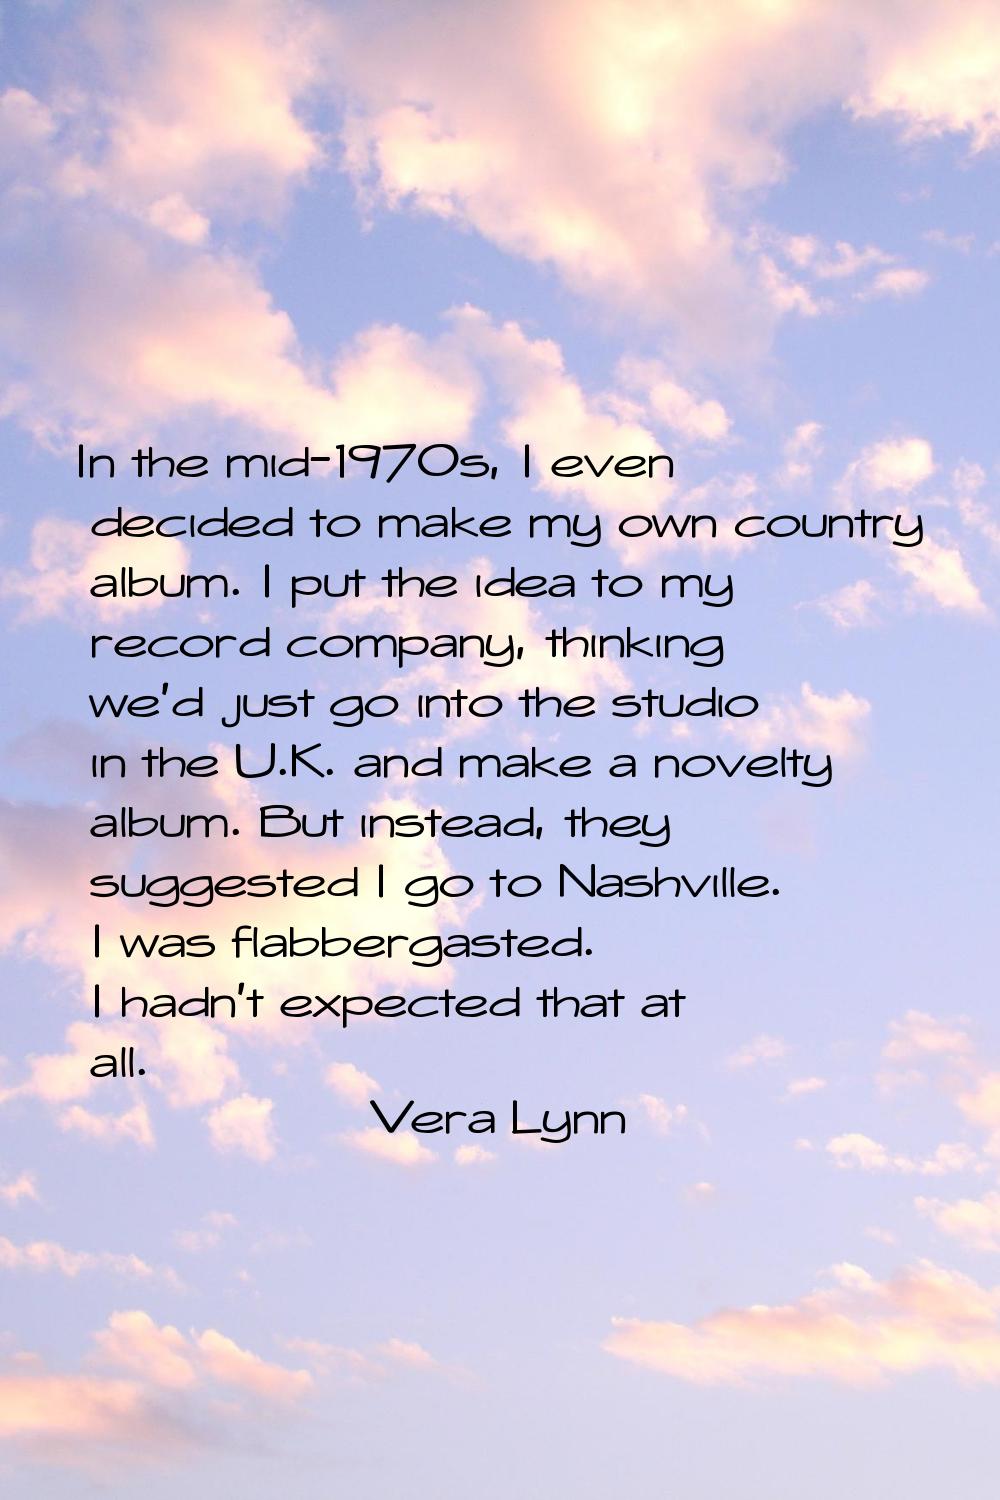 In the mid-1970s, I even decided to make my own country album. I put the idea to my record company,